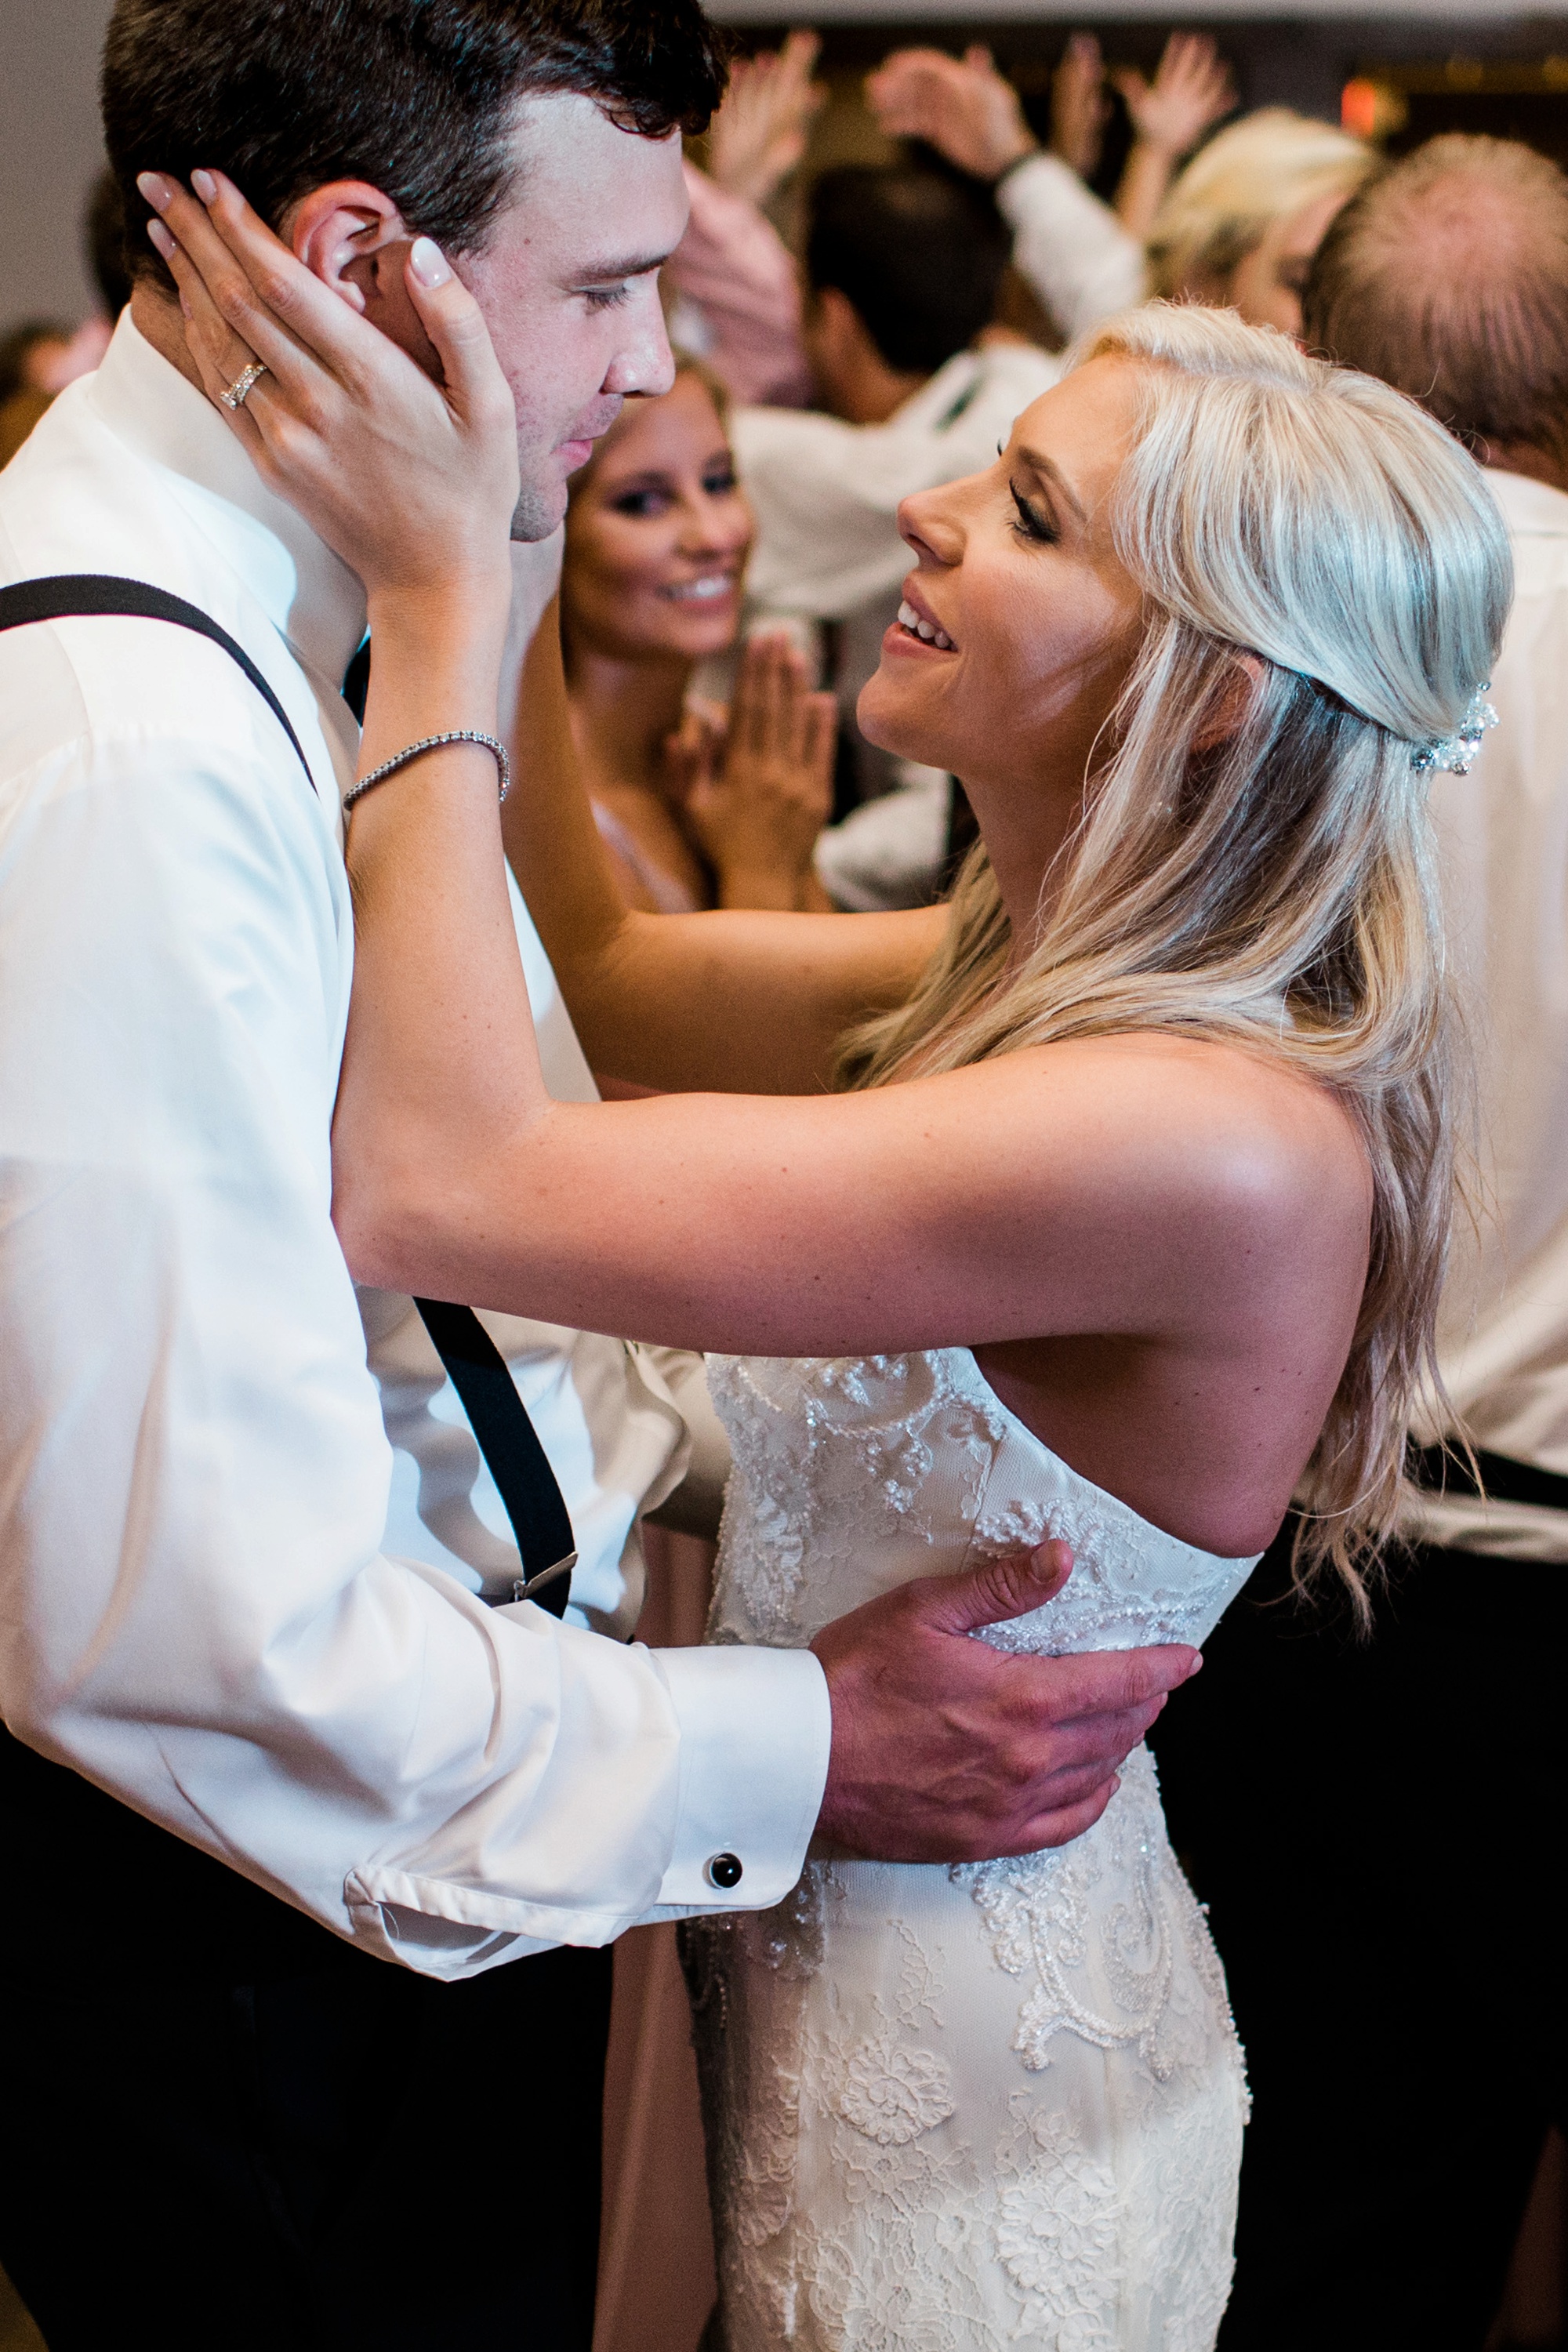 Sweet moment on the dance floor between bride and groom captured by Rebecca Cerasani